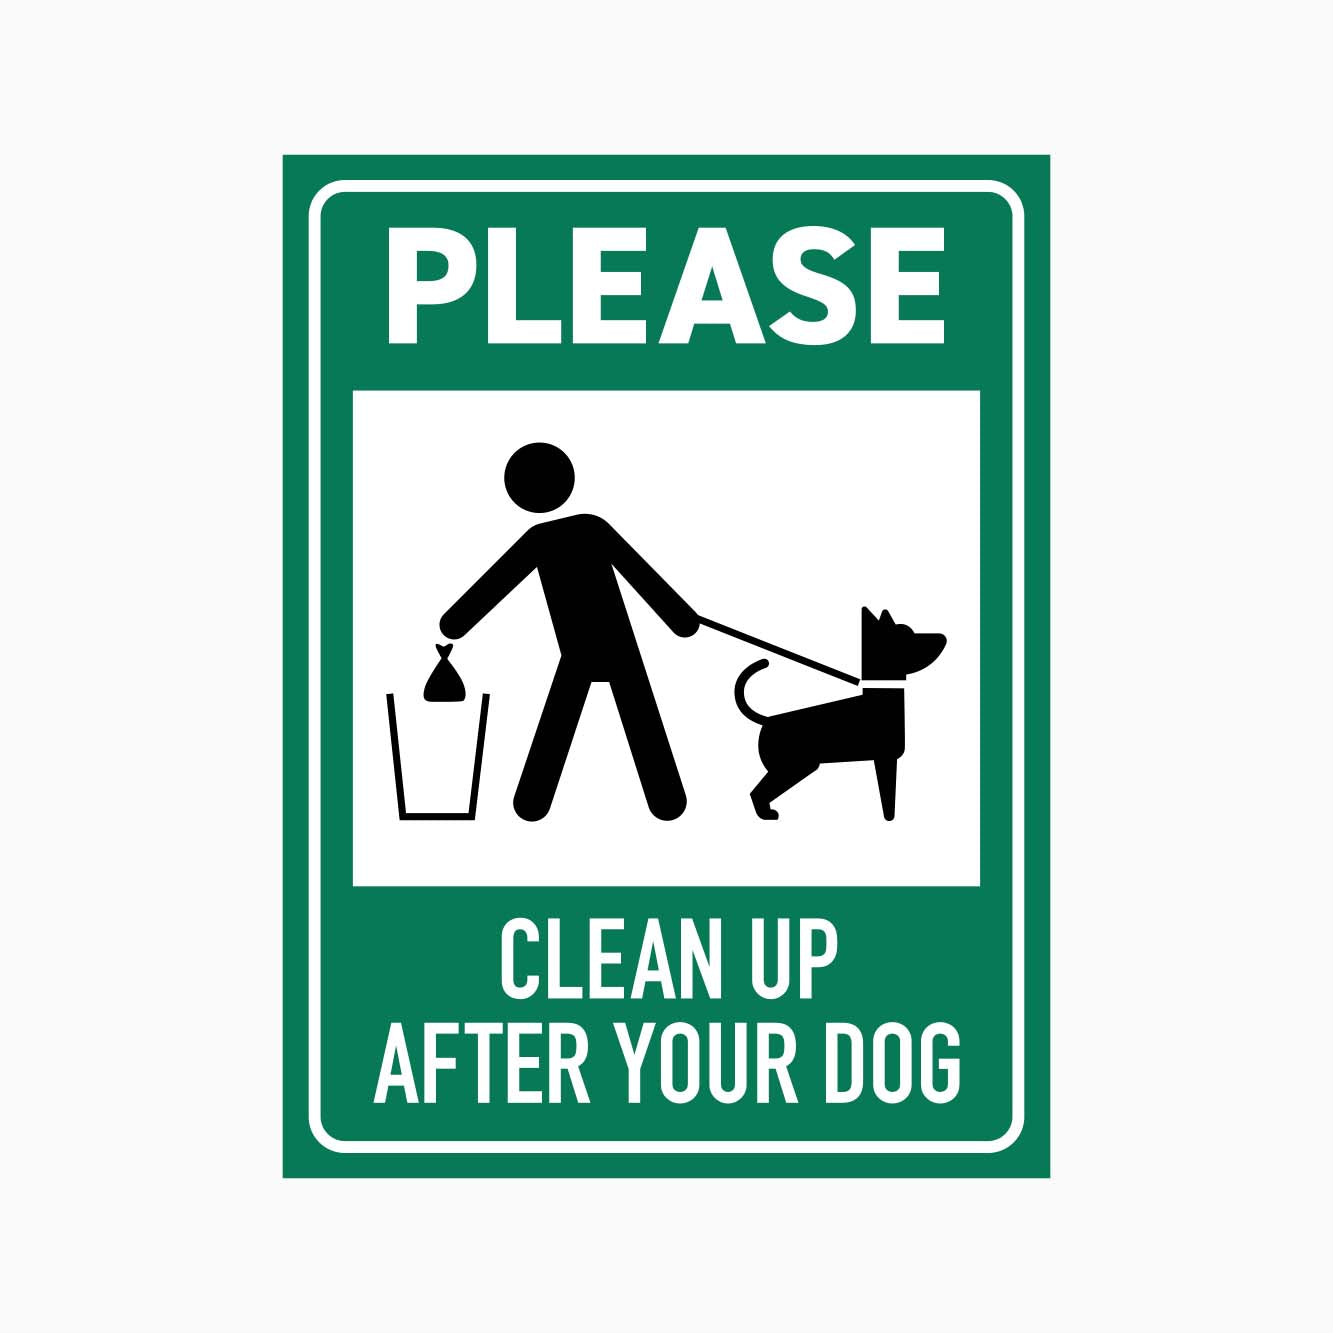 PLEASE CLEAN UP AFTER YOUR DOG SIGN - GET SIGNS